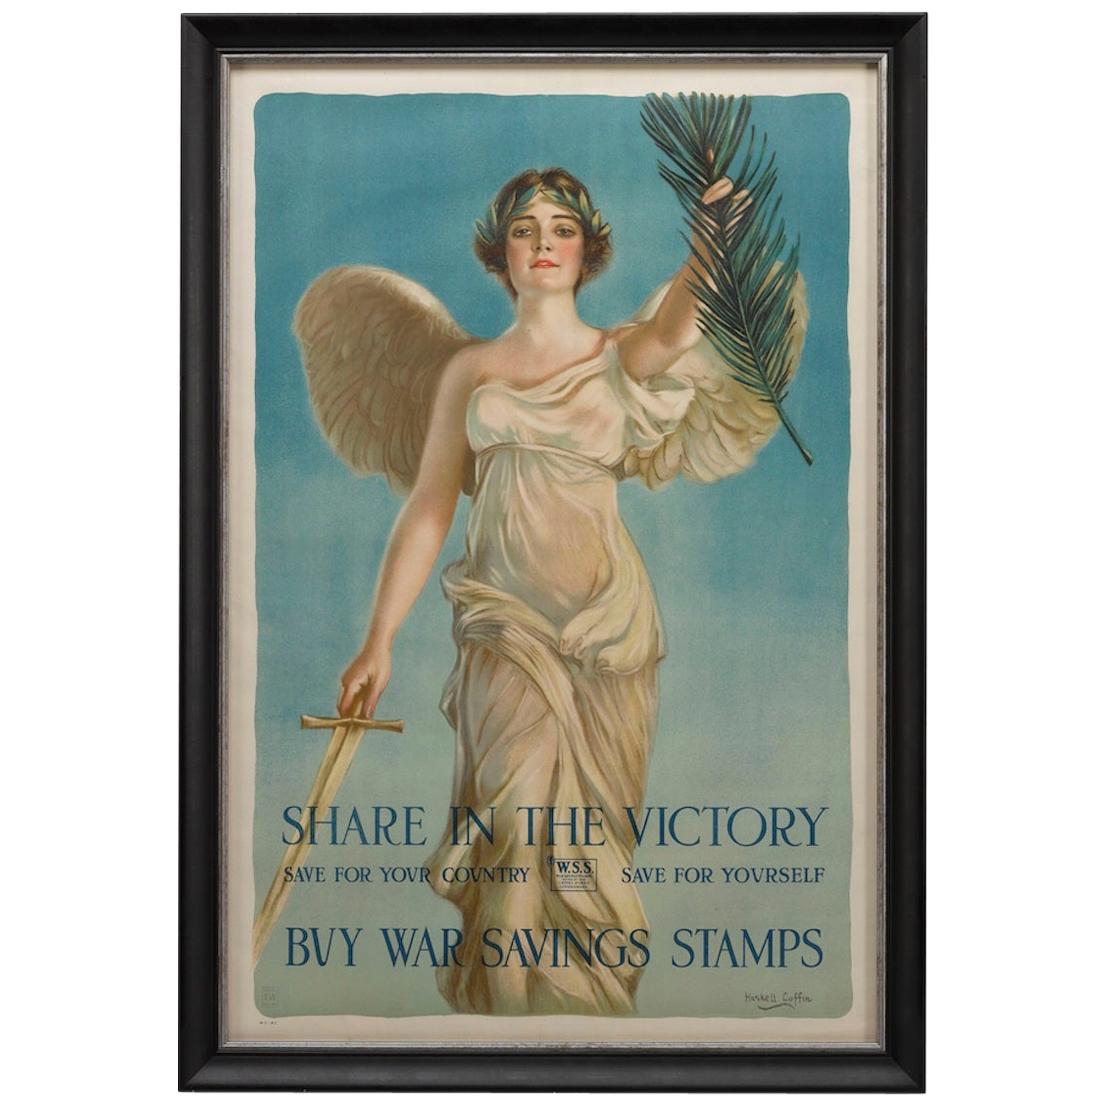 WWI Poster "Share in the Victory" by Haskell Coffin, Vintage Poster, 1918